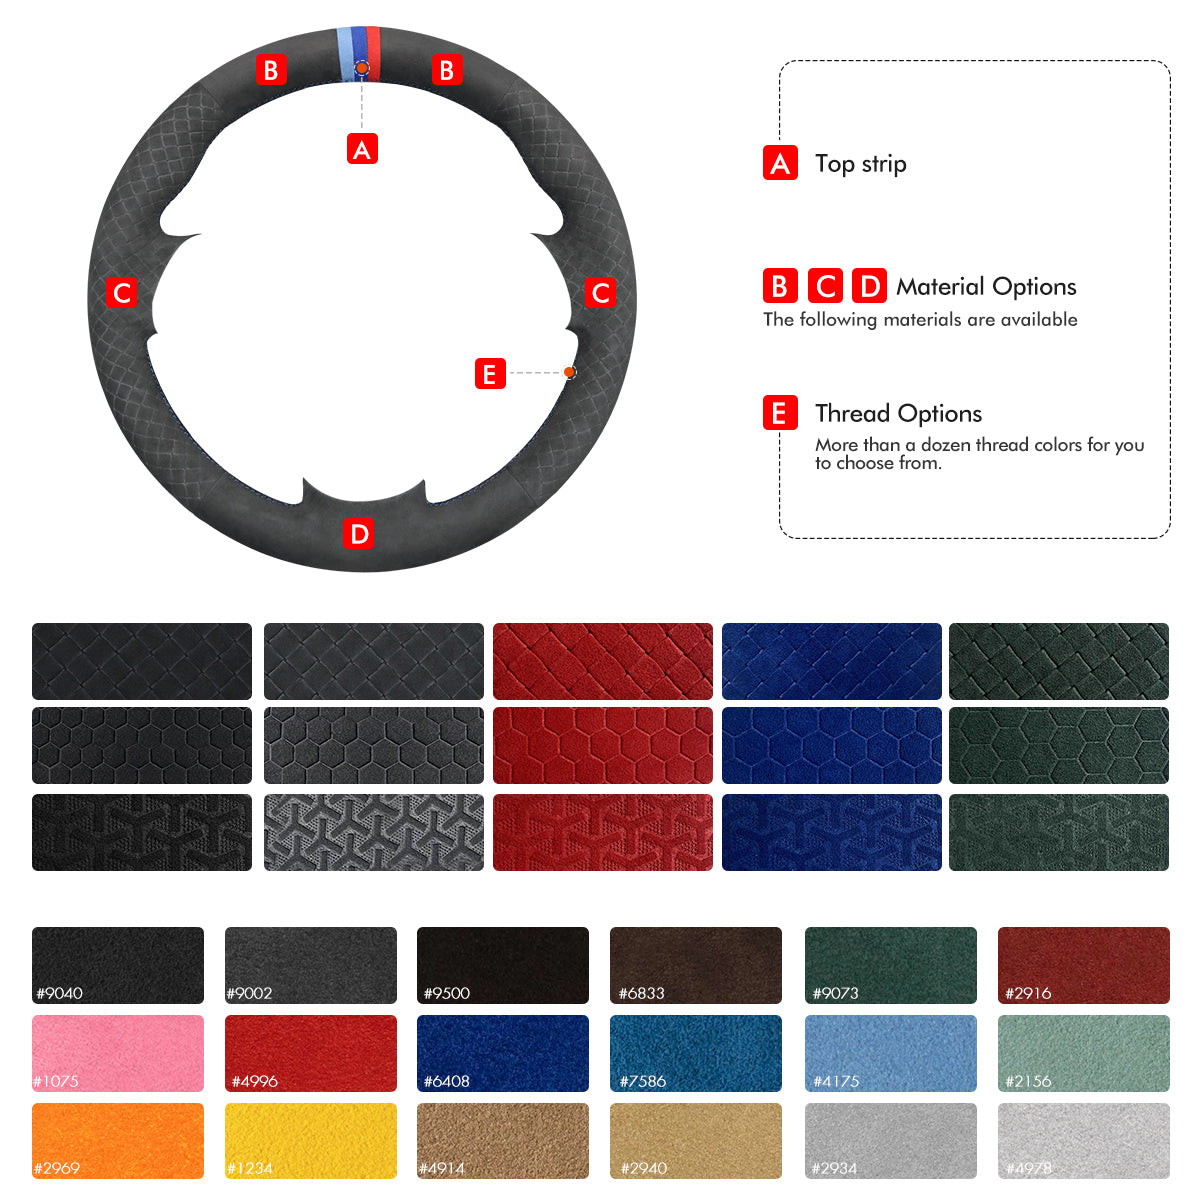 MEWANT Black PU Leather Real Genuine Leather Car Steering Wheel Cover for Mazda CX-30 CX30 2019-2020 Mazda 3 Axela 2019-2020